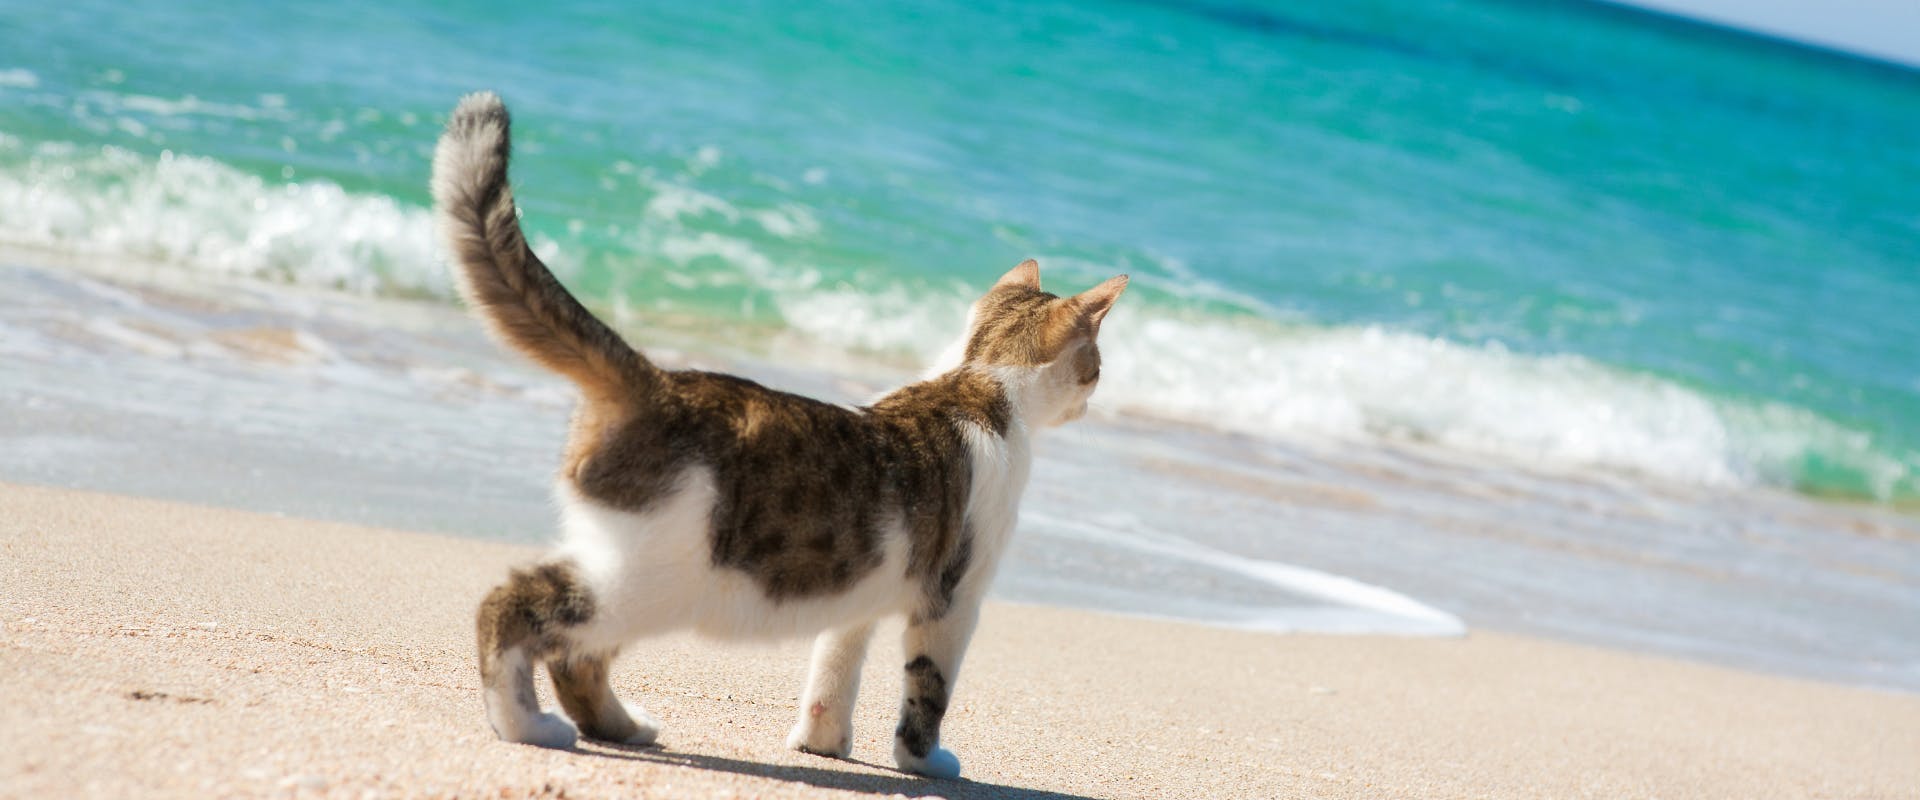 calico cat walking on a beach next to a blue shoreline